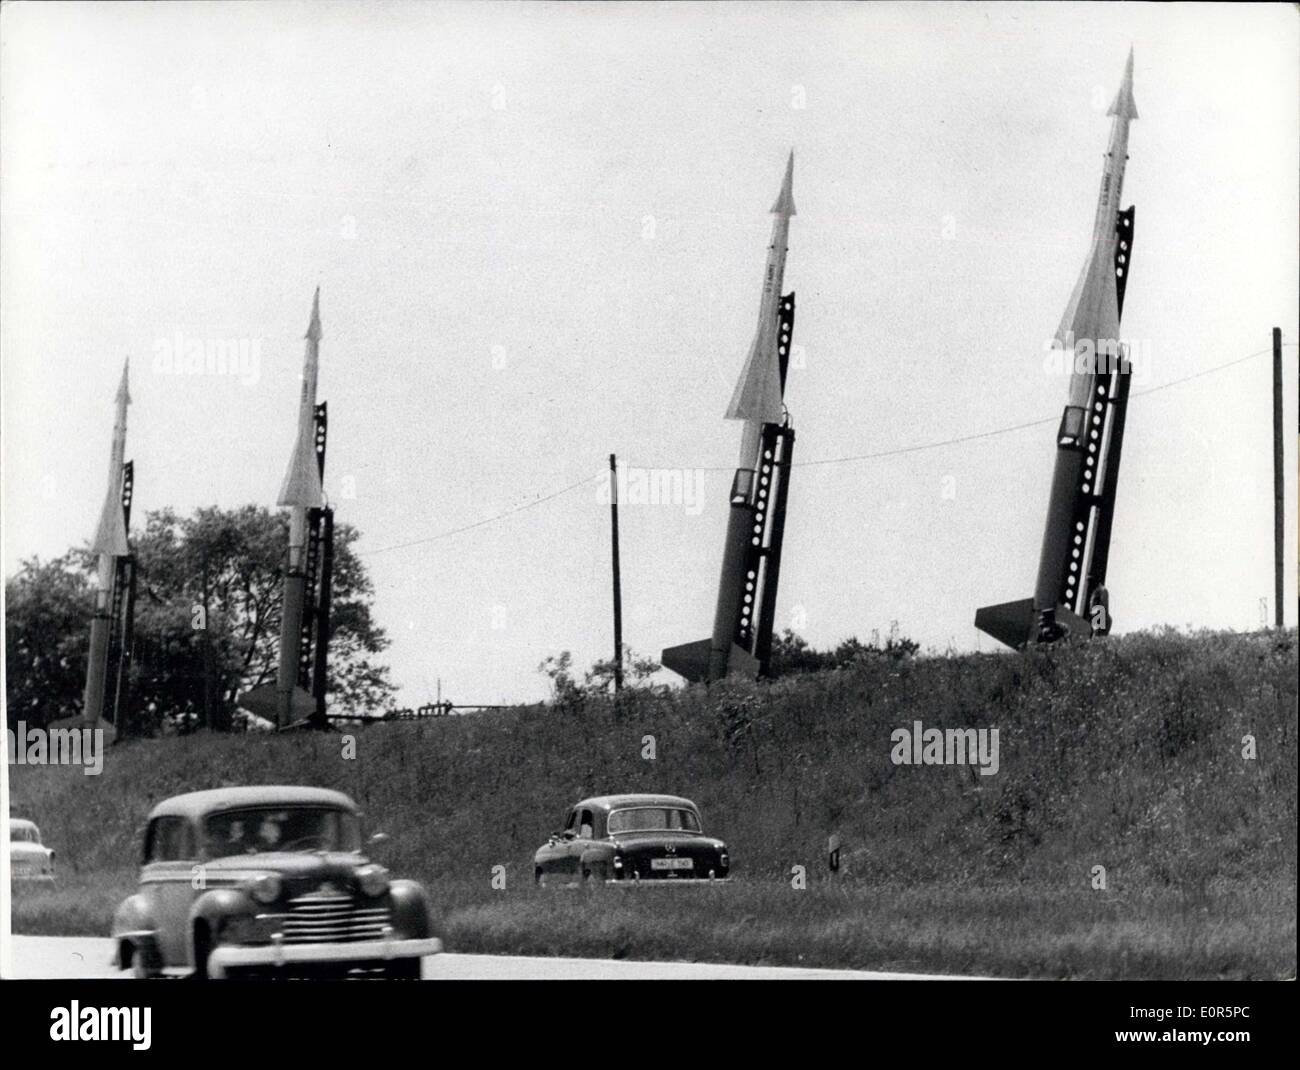 May 22, 1958 - Nike-rockets lined up at the Autobahn.: American Nike -  anti-aircraft - missiles are put up along side the Autobahn Darmstadt-Manheim.  They are belonging to the most important missile